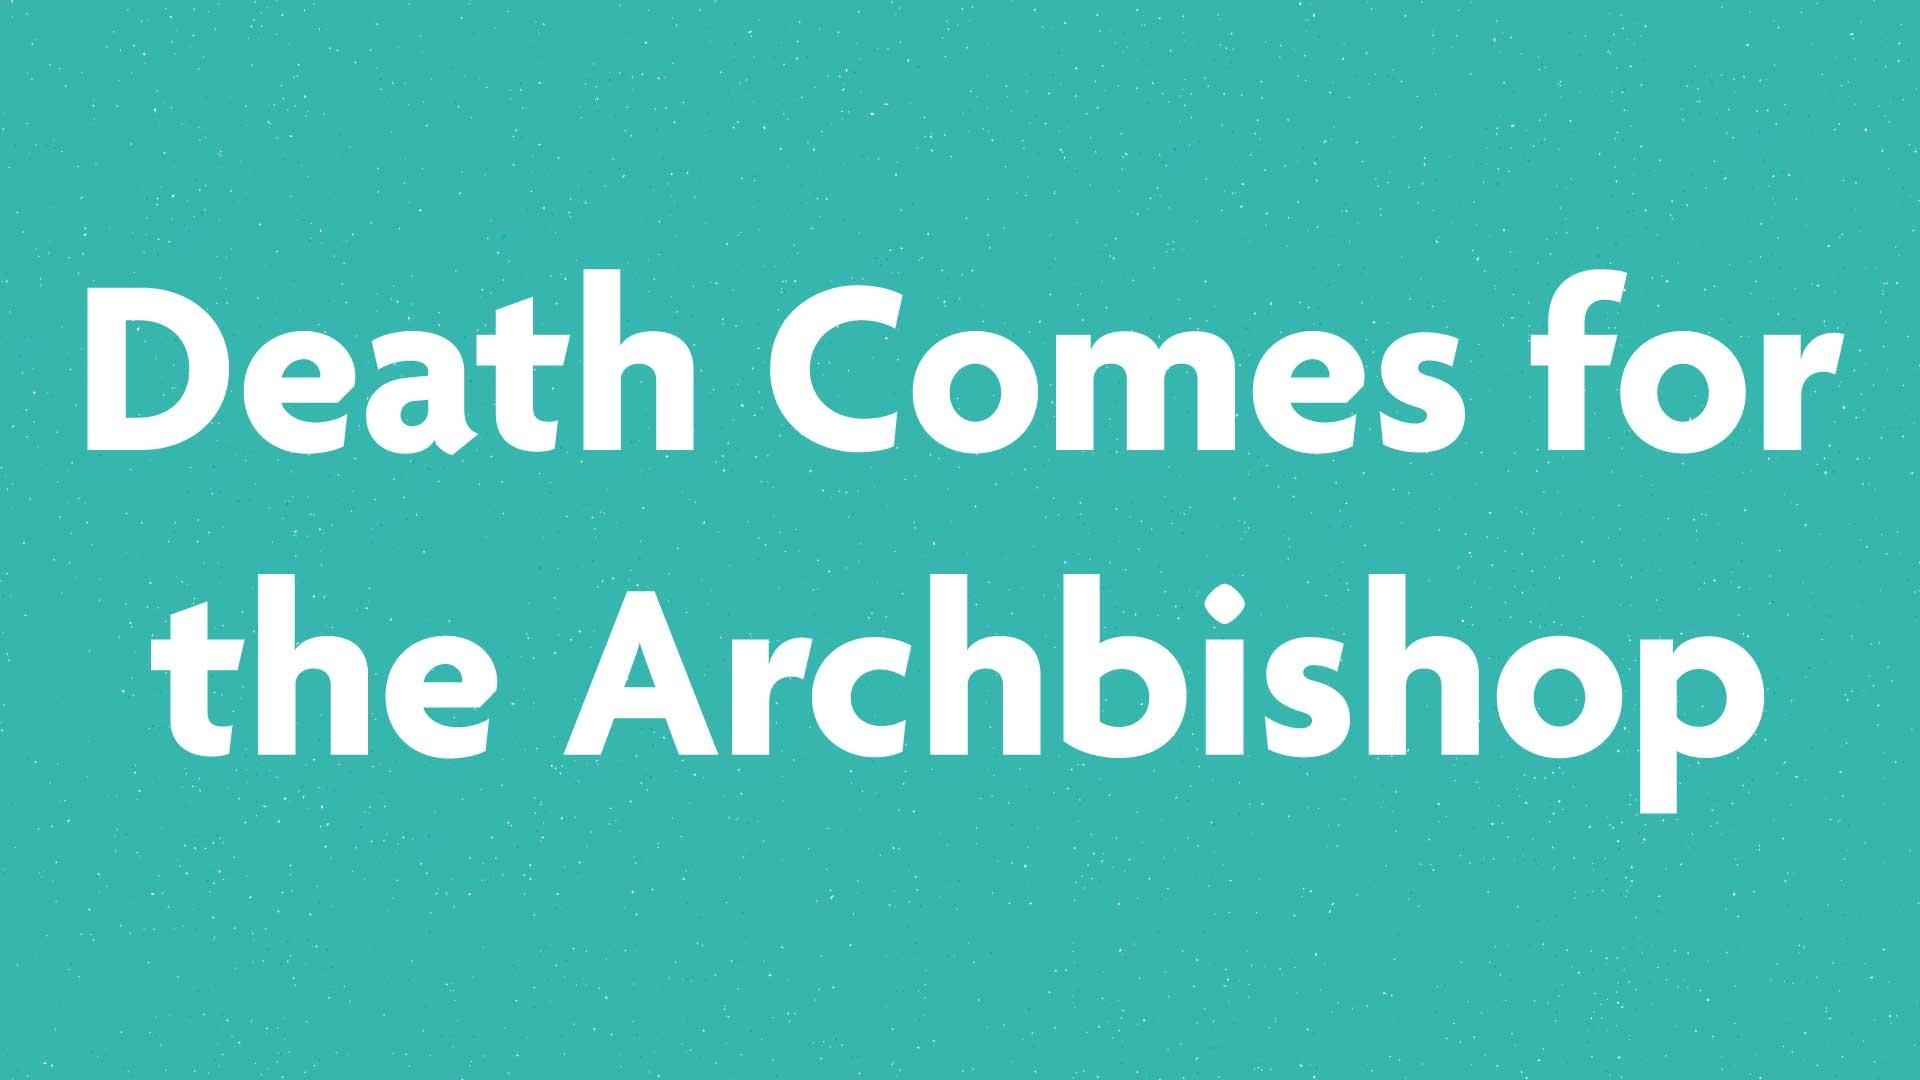 Death Comes for the Archbishop book submission card on a green background.